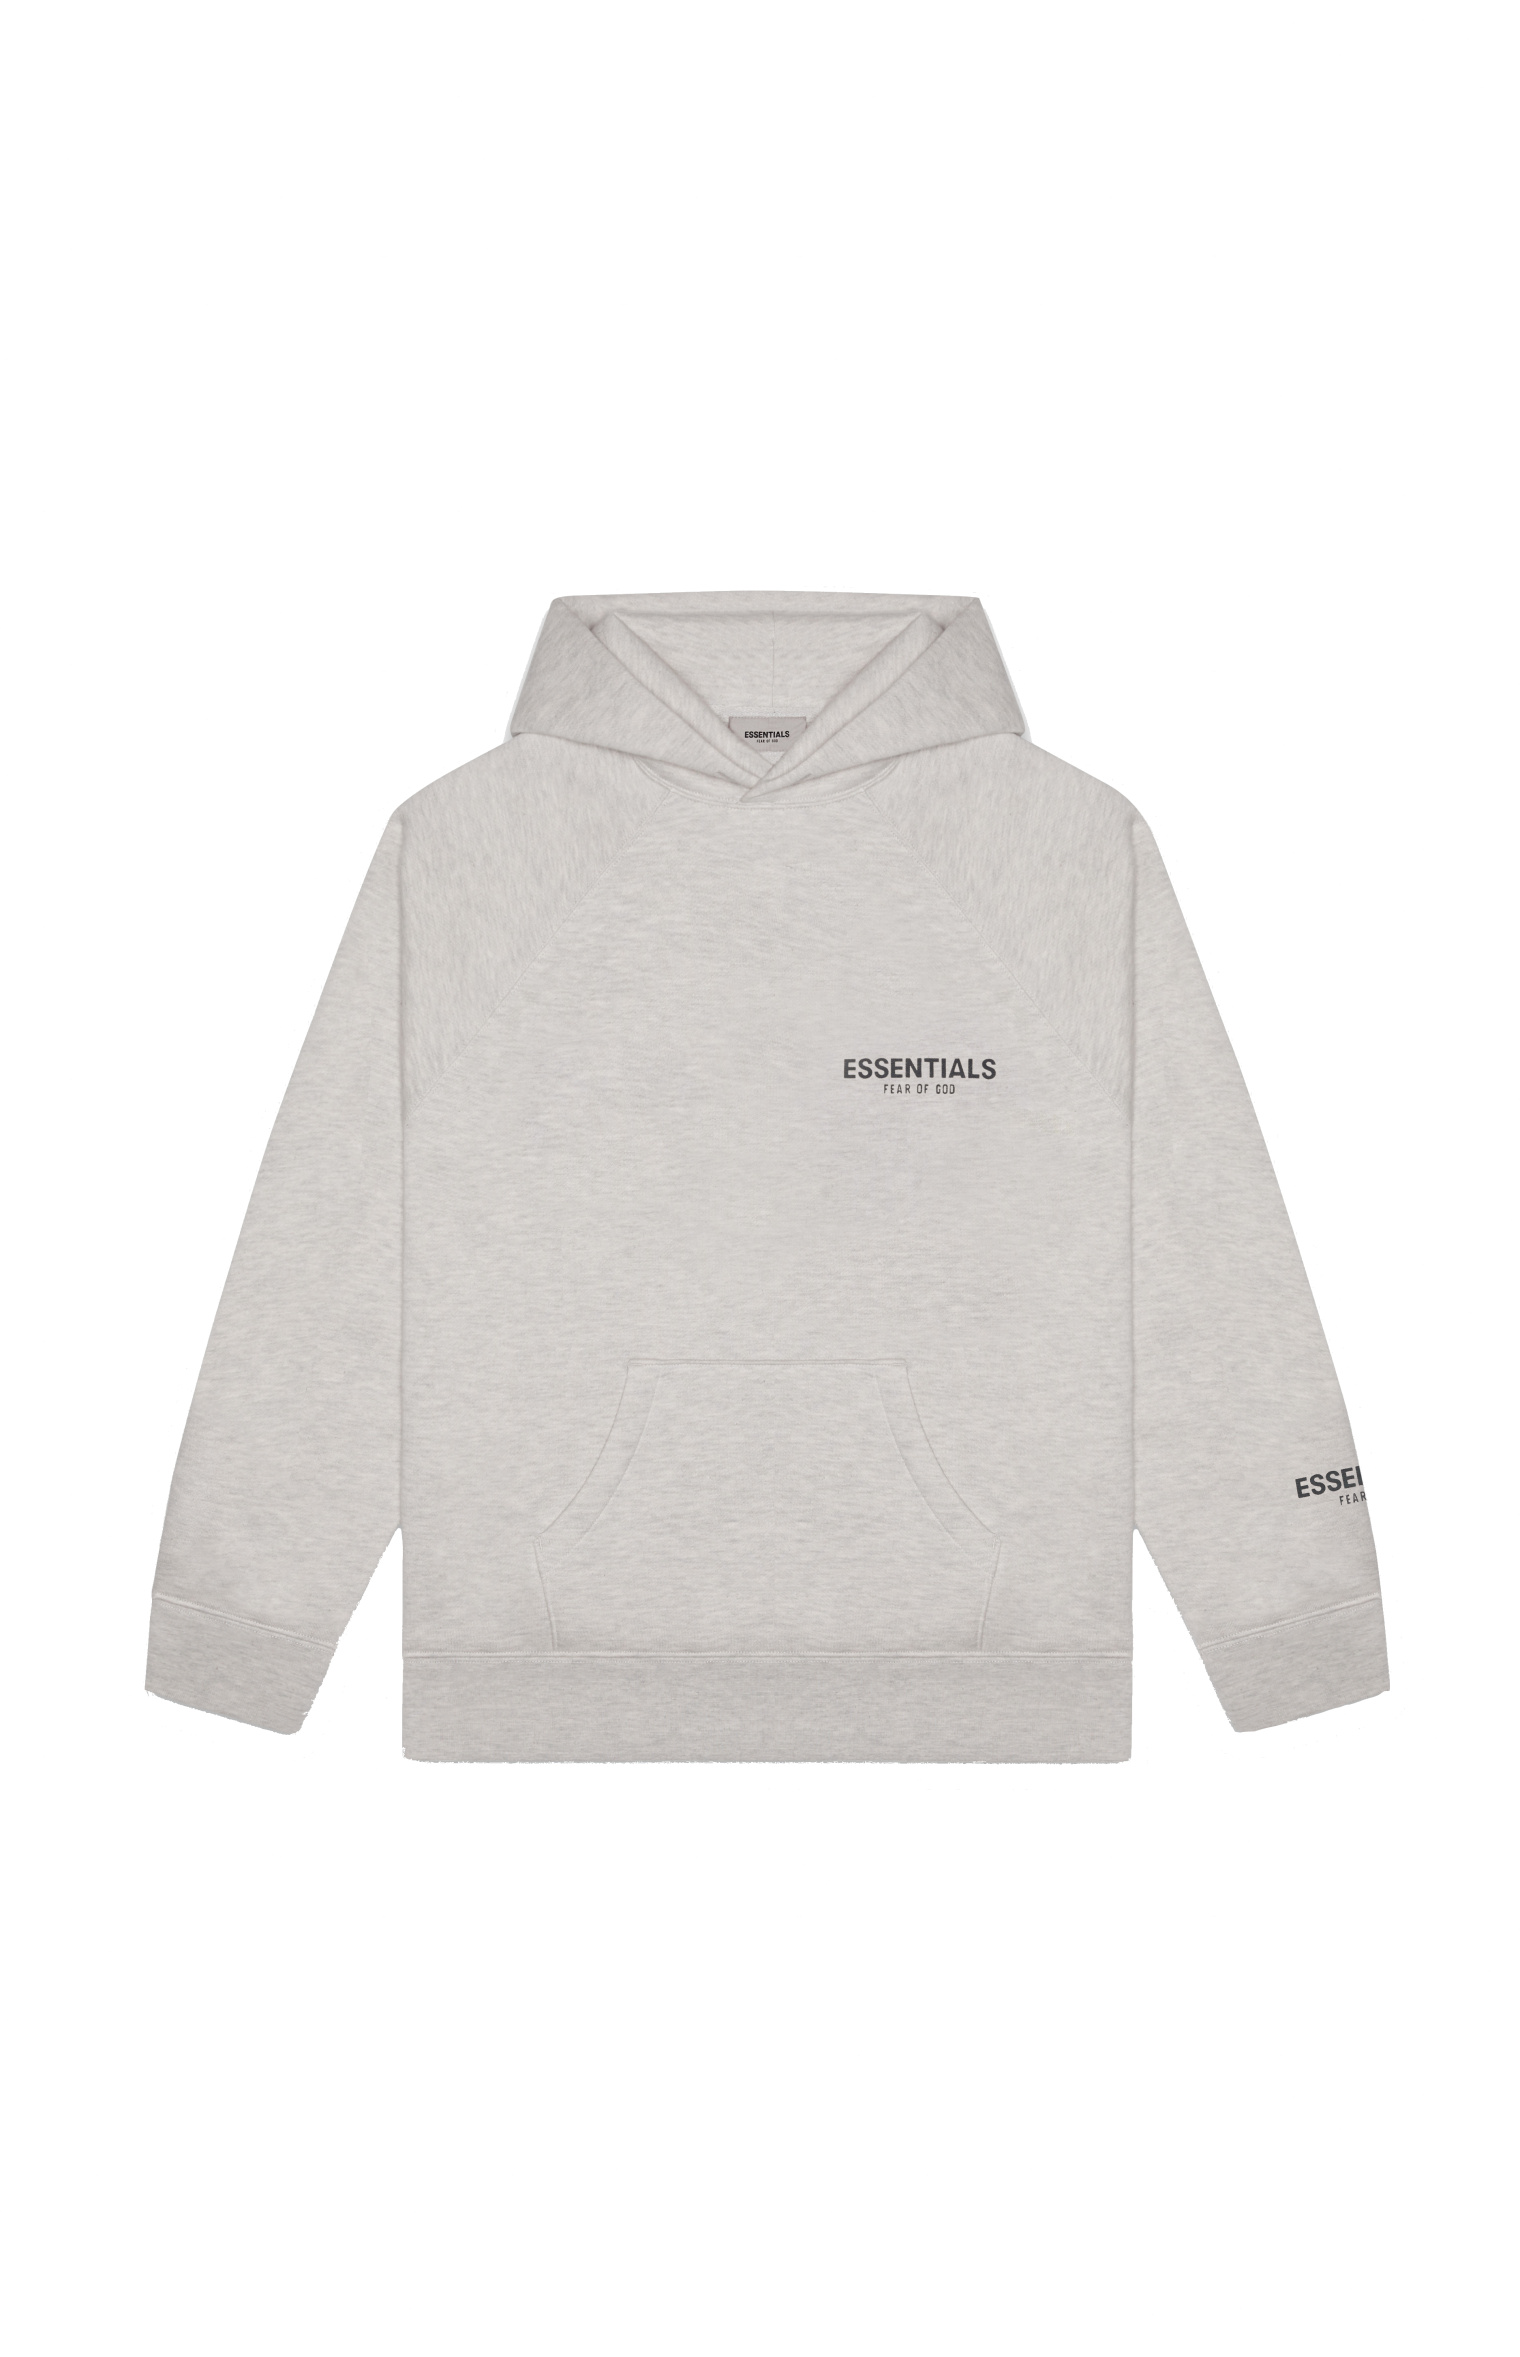 Fear of God Essentials Cotton Pullover Hoodie